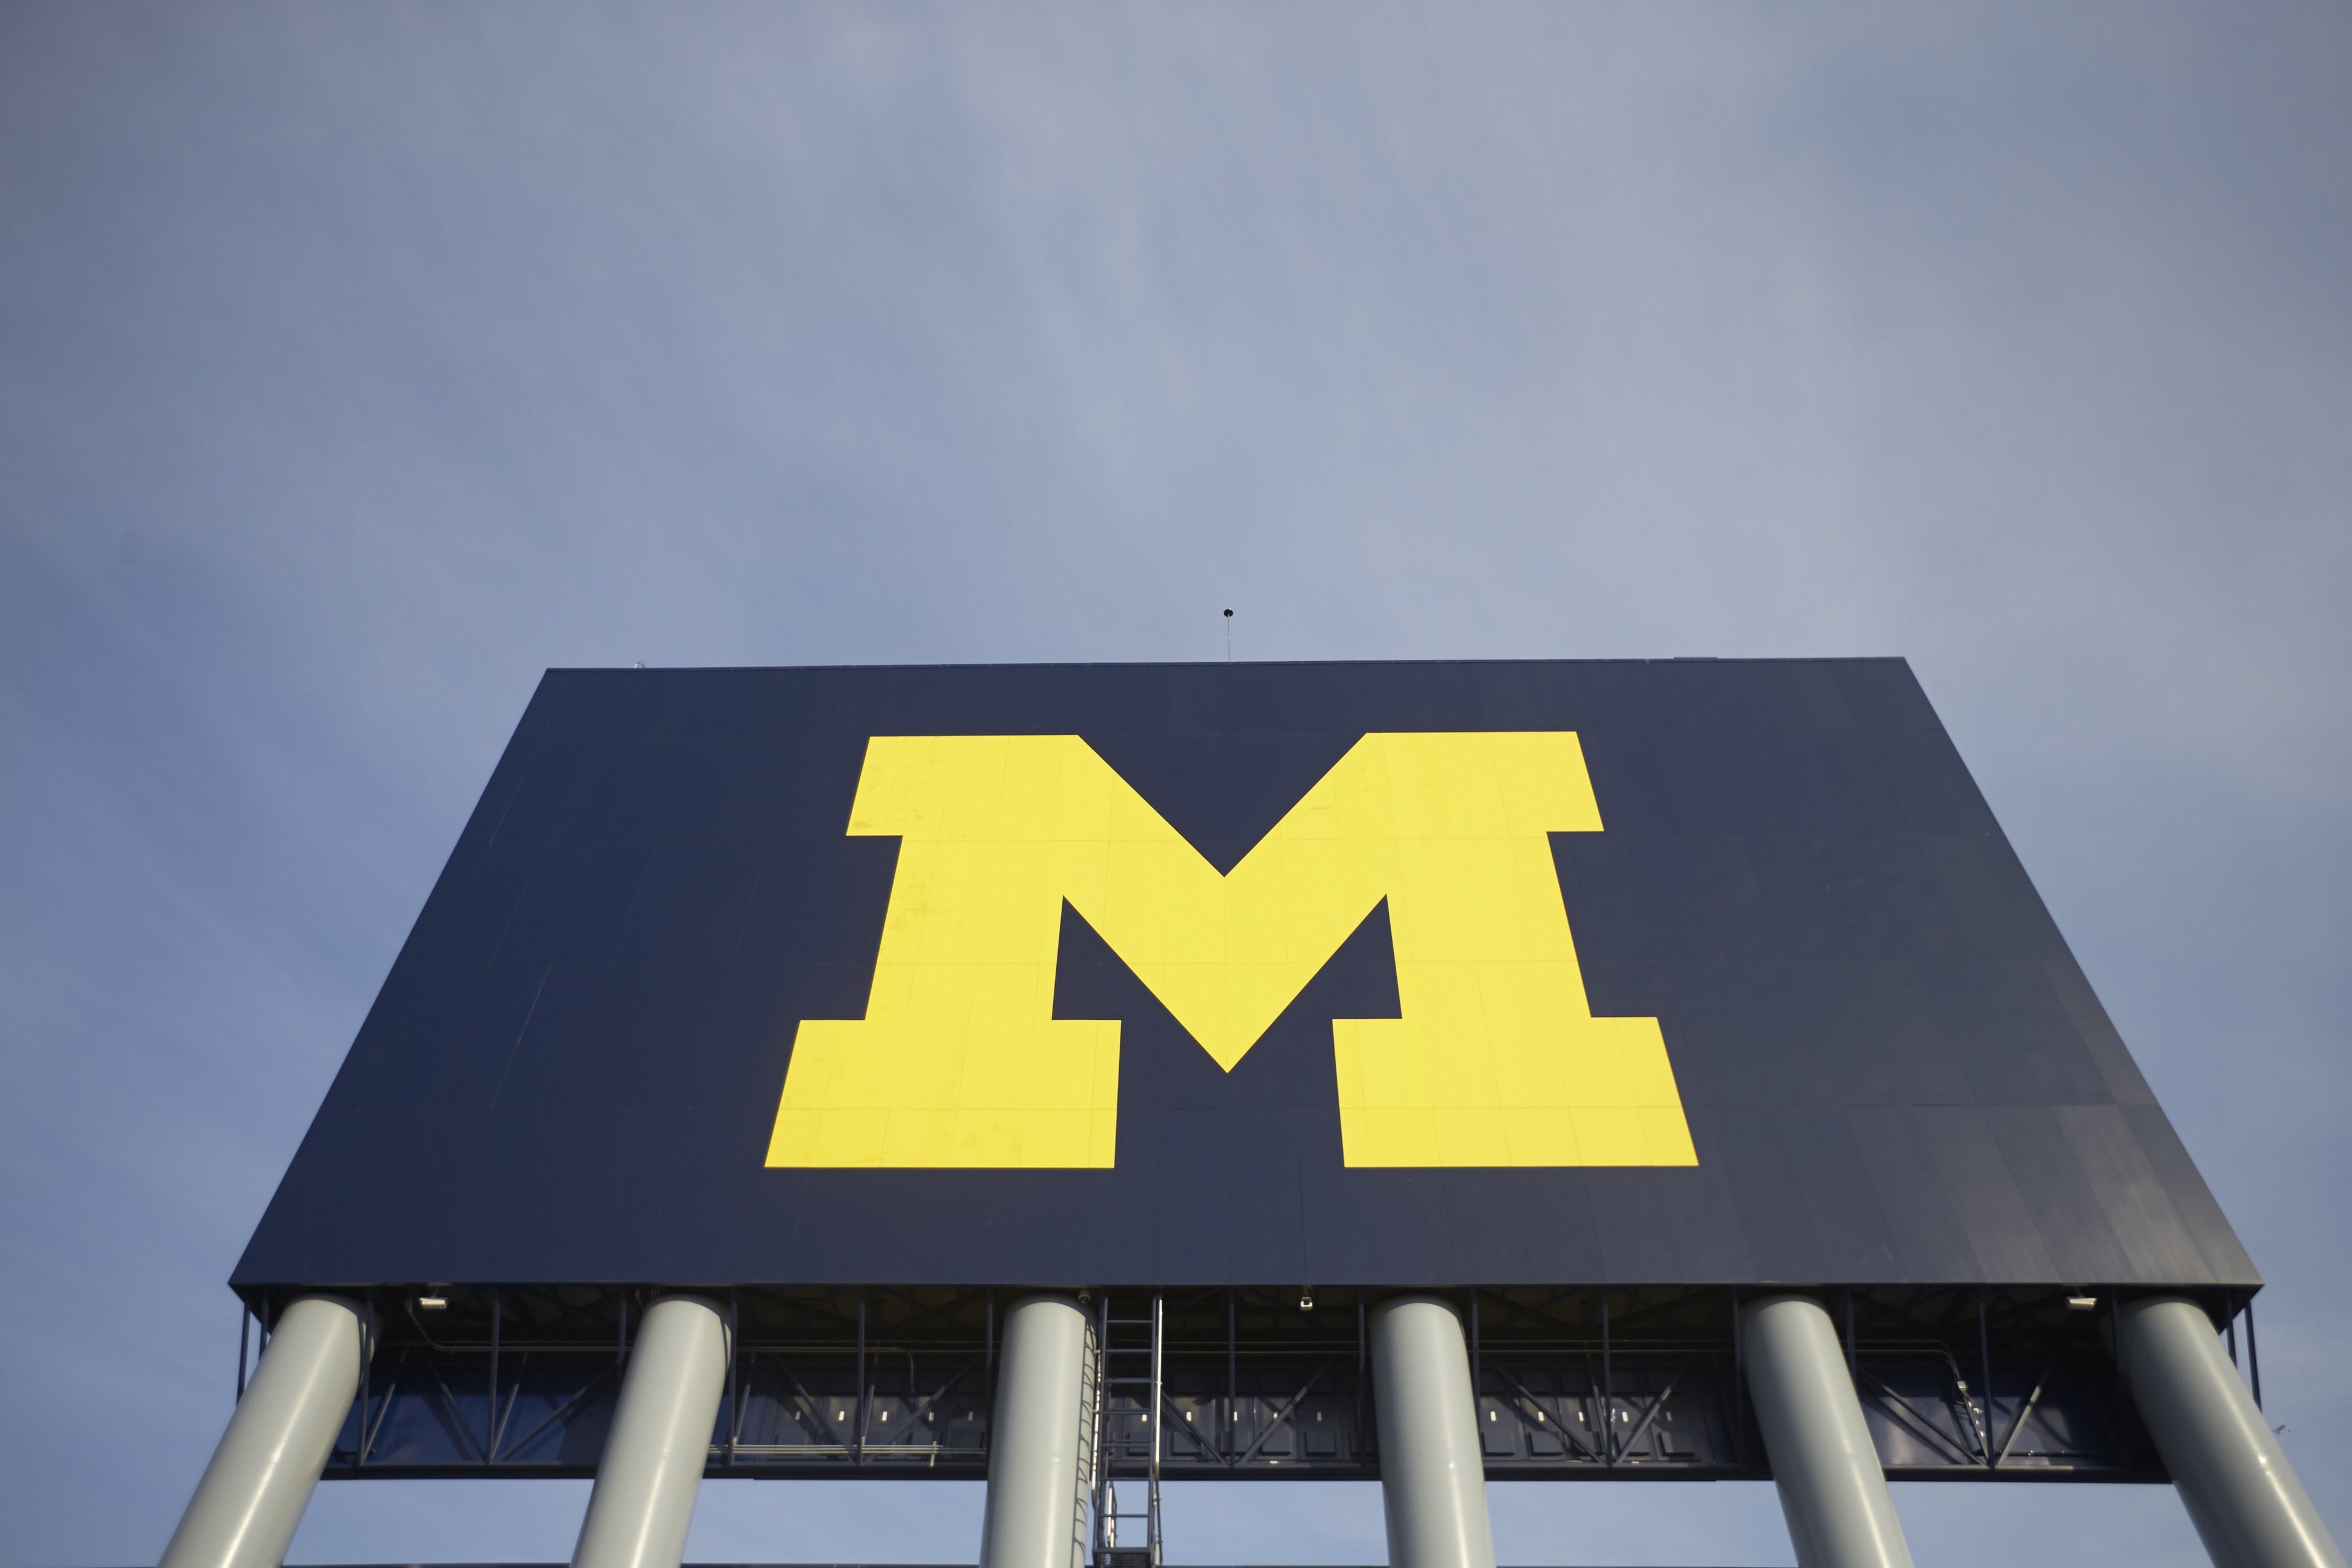 Michigan football placed on probation, fined for recruiting violations after deal with the NCAA